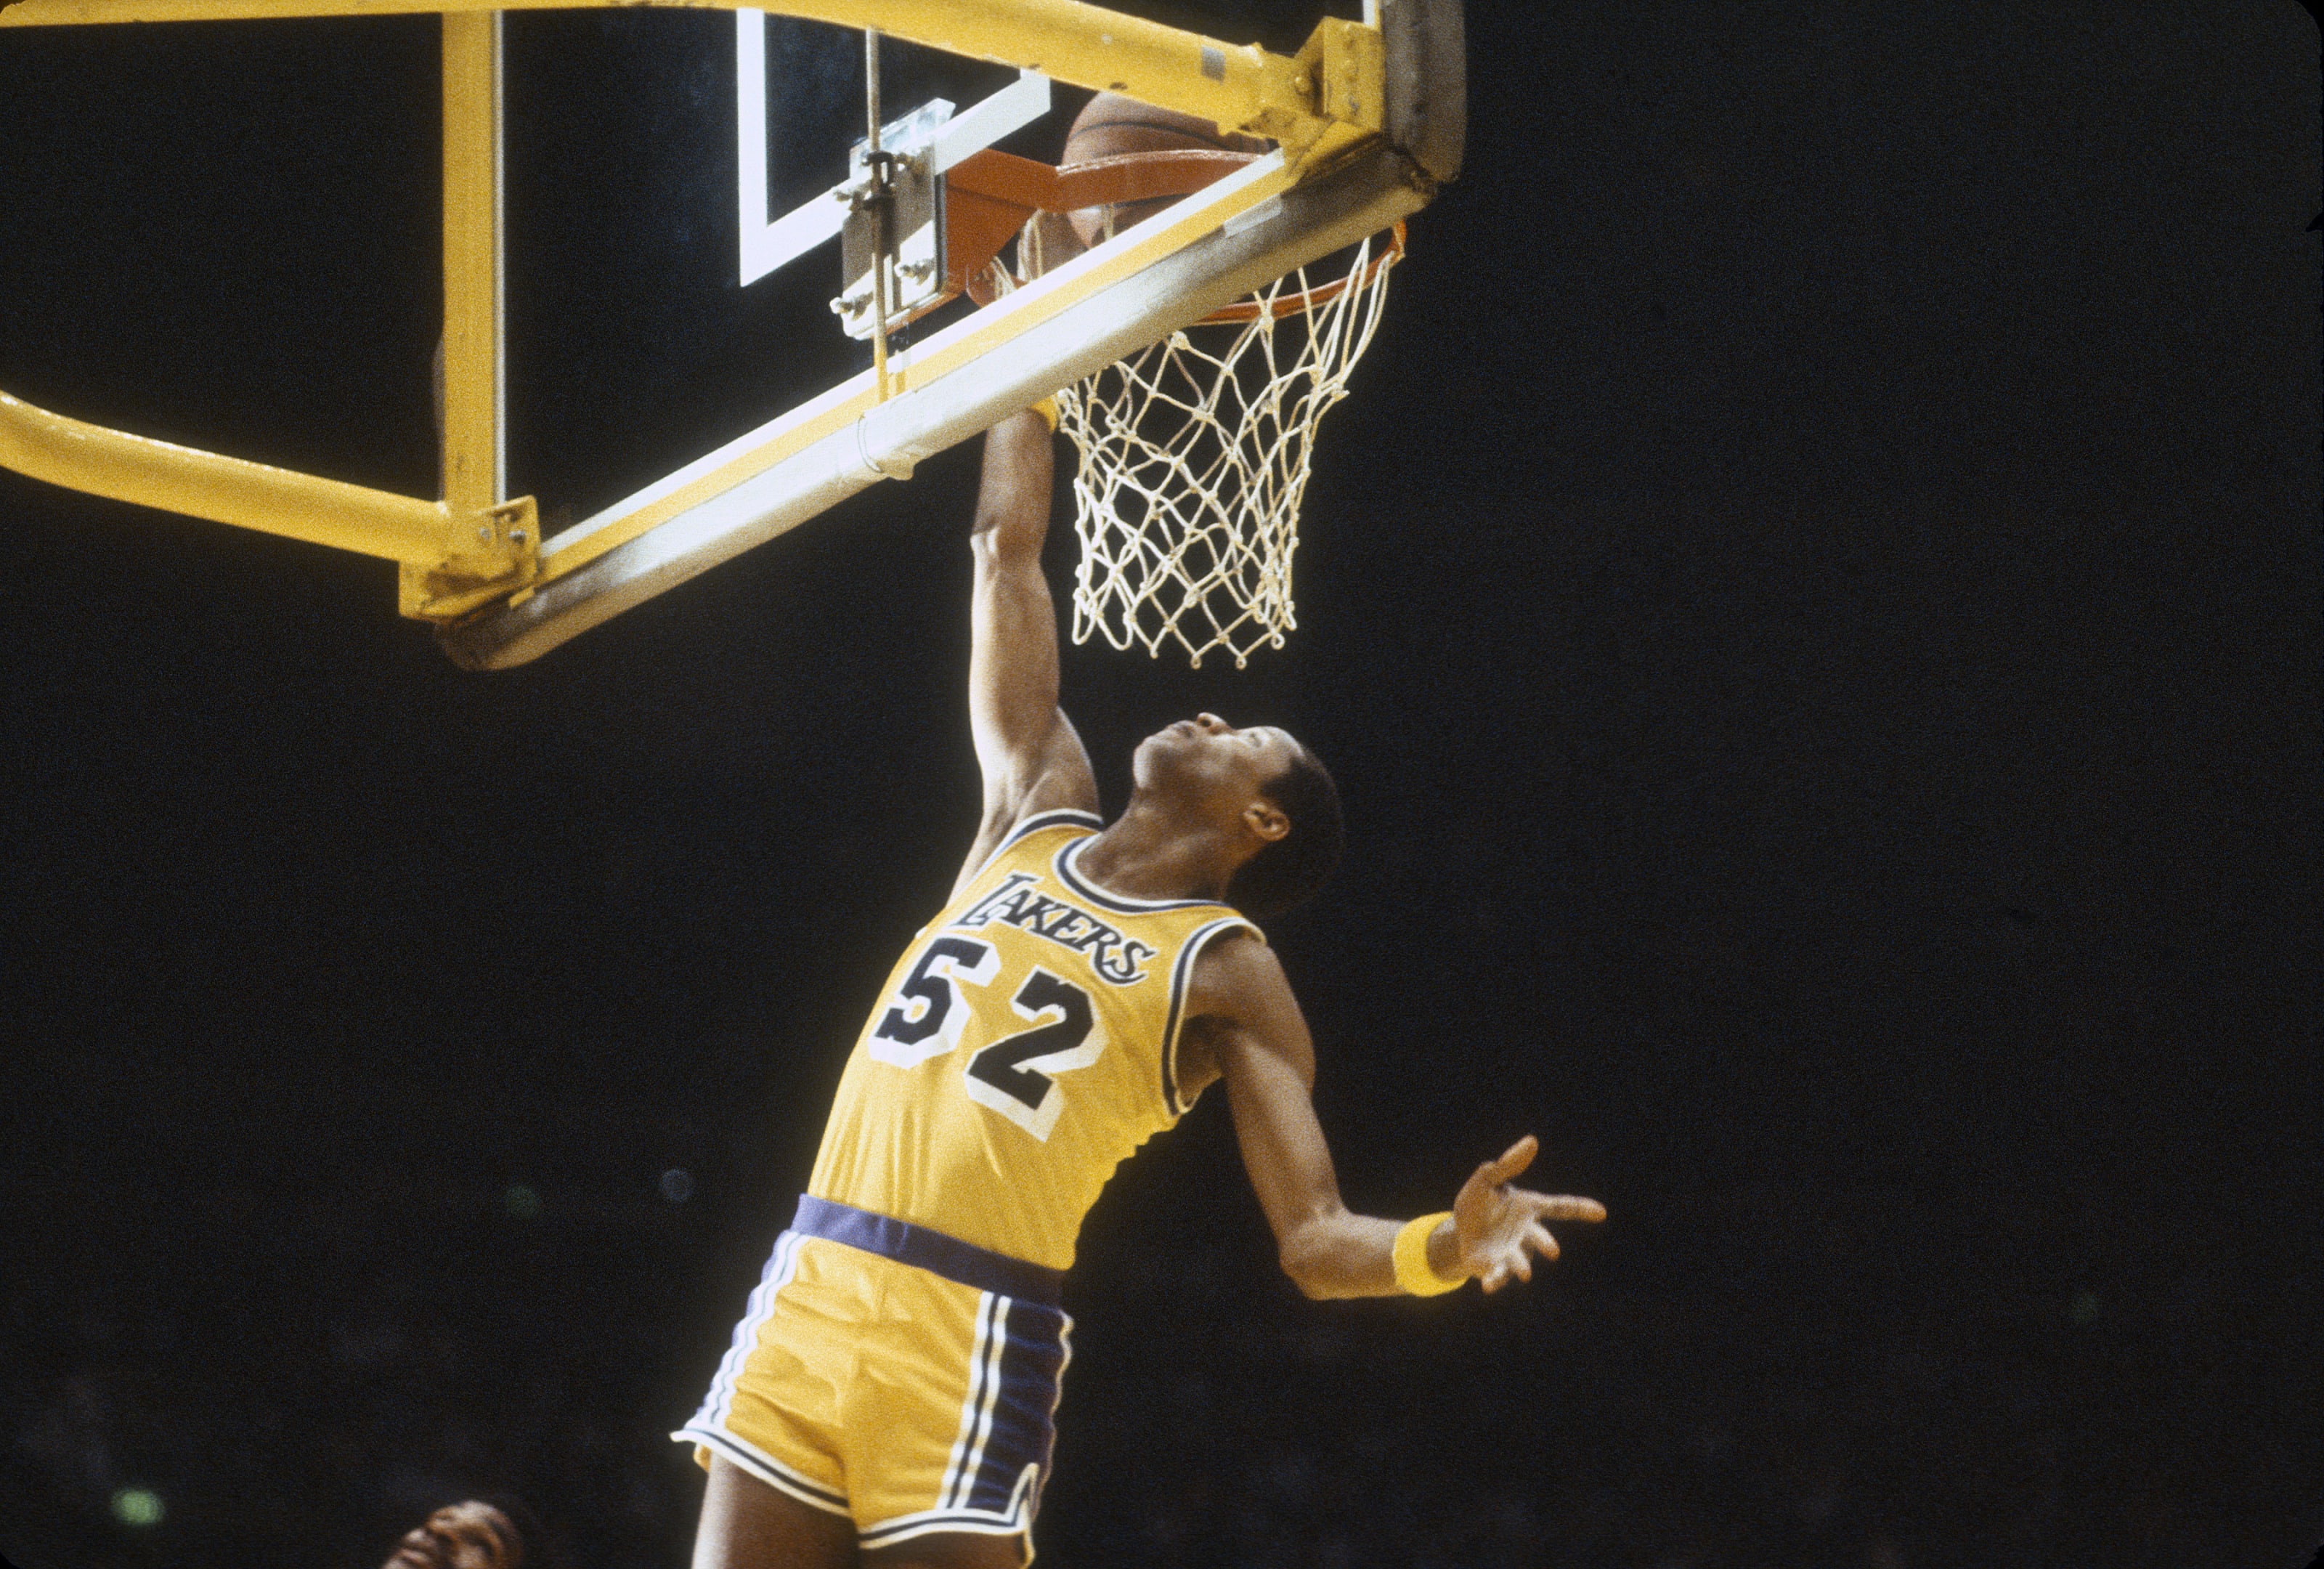 Jamaal Wilkes on the challenge of playing second fiddle to star